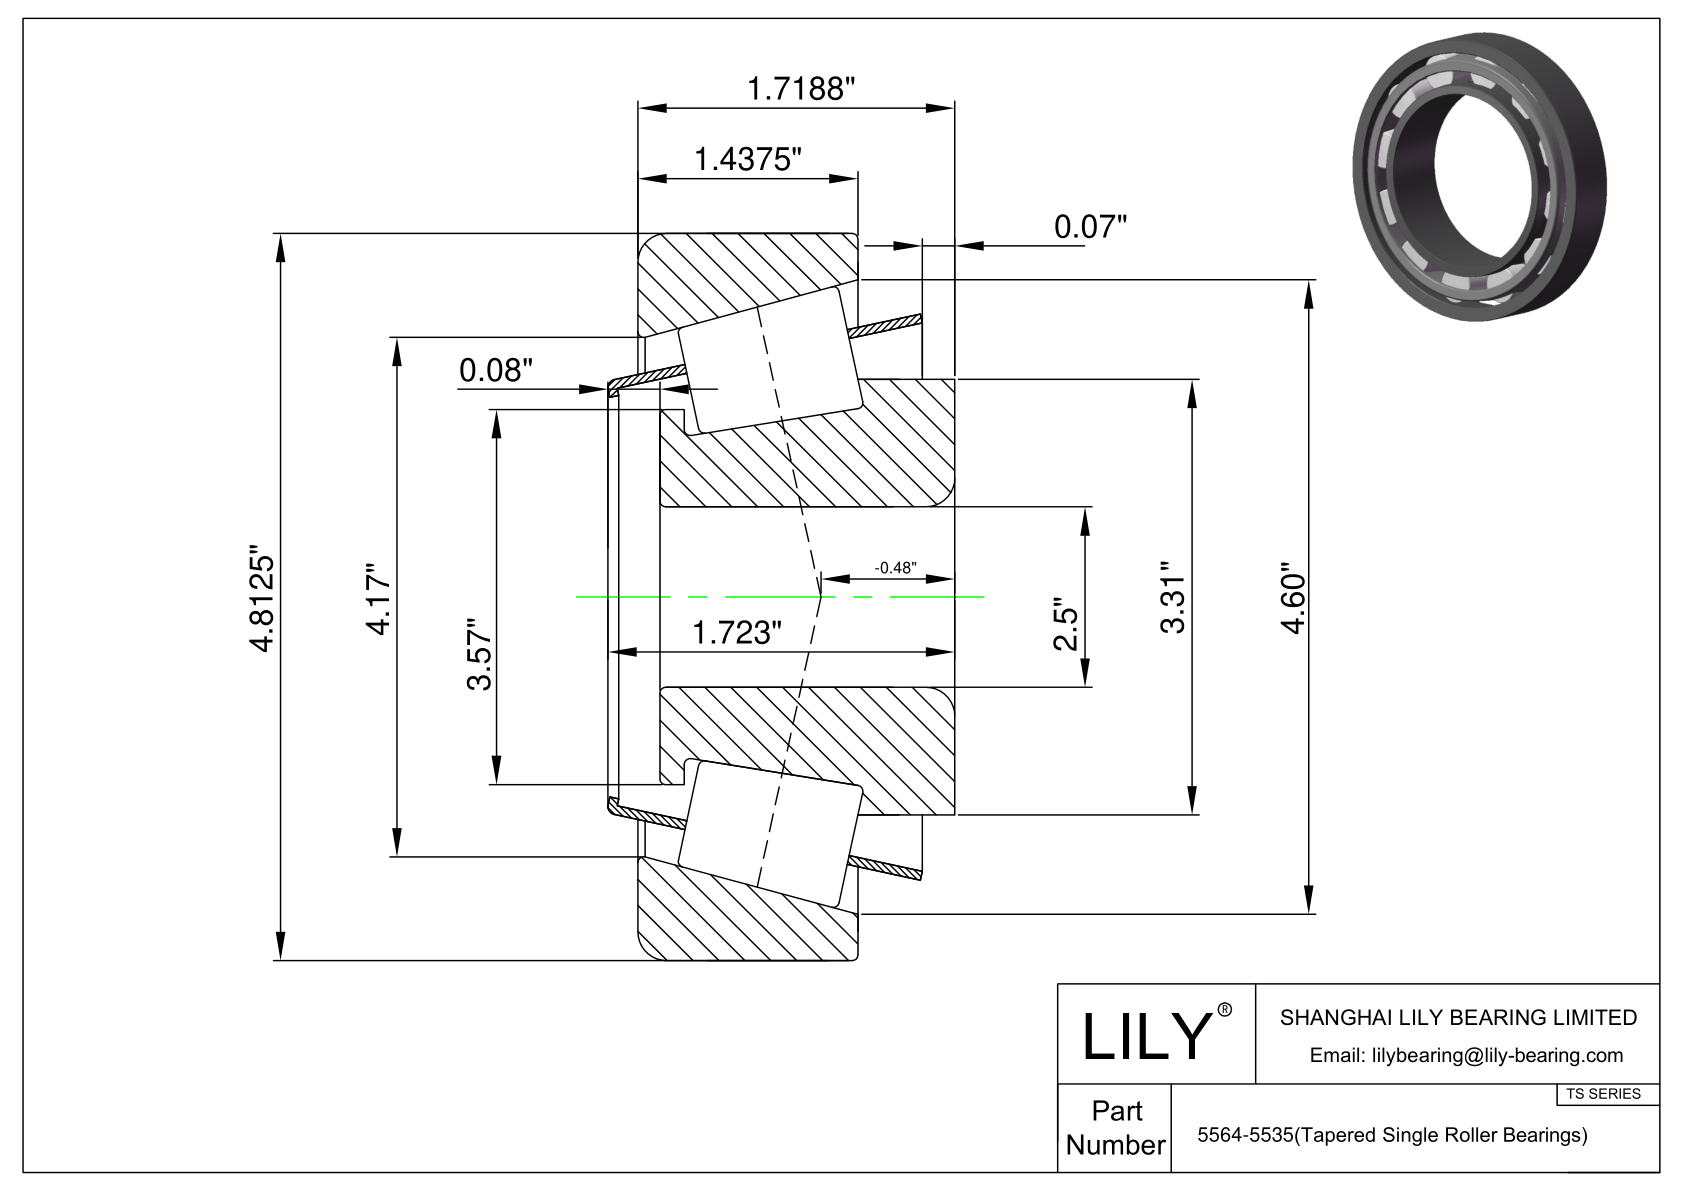 5564-5535 TS (Tapered Single Roller Bearings) (Imperial) cad drawing